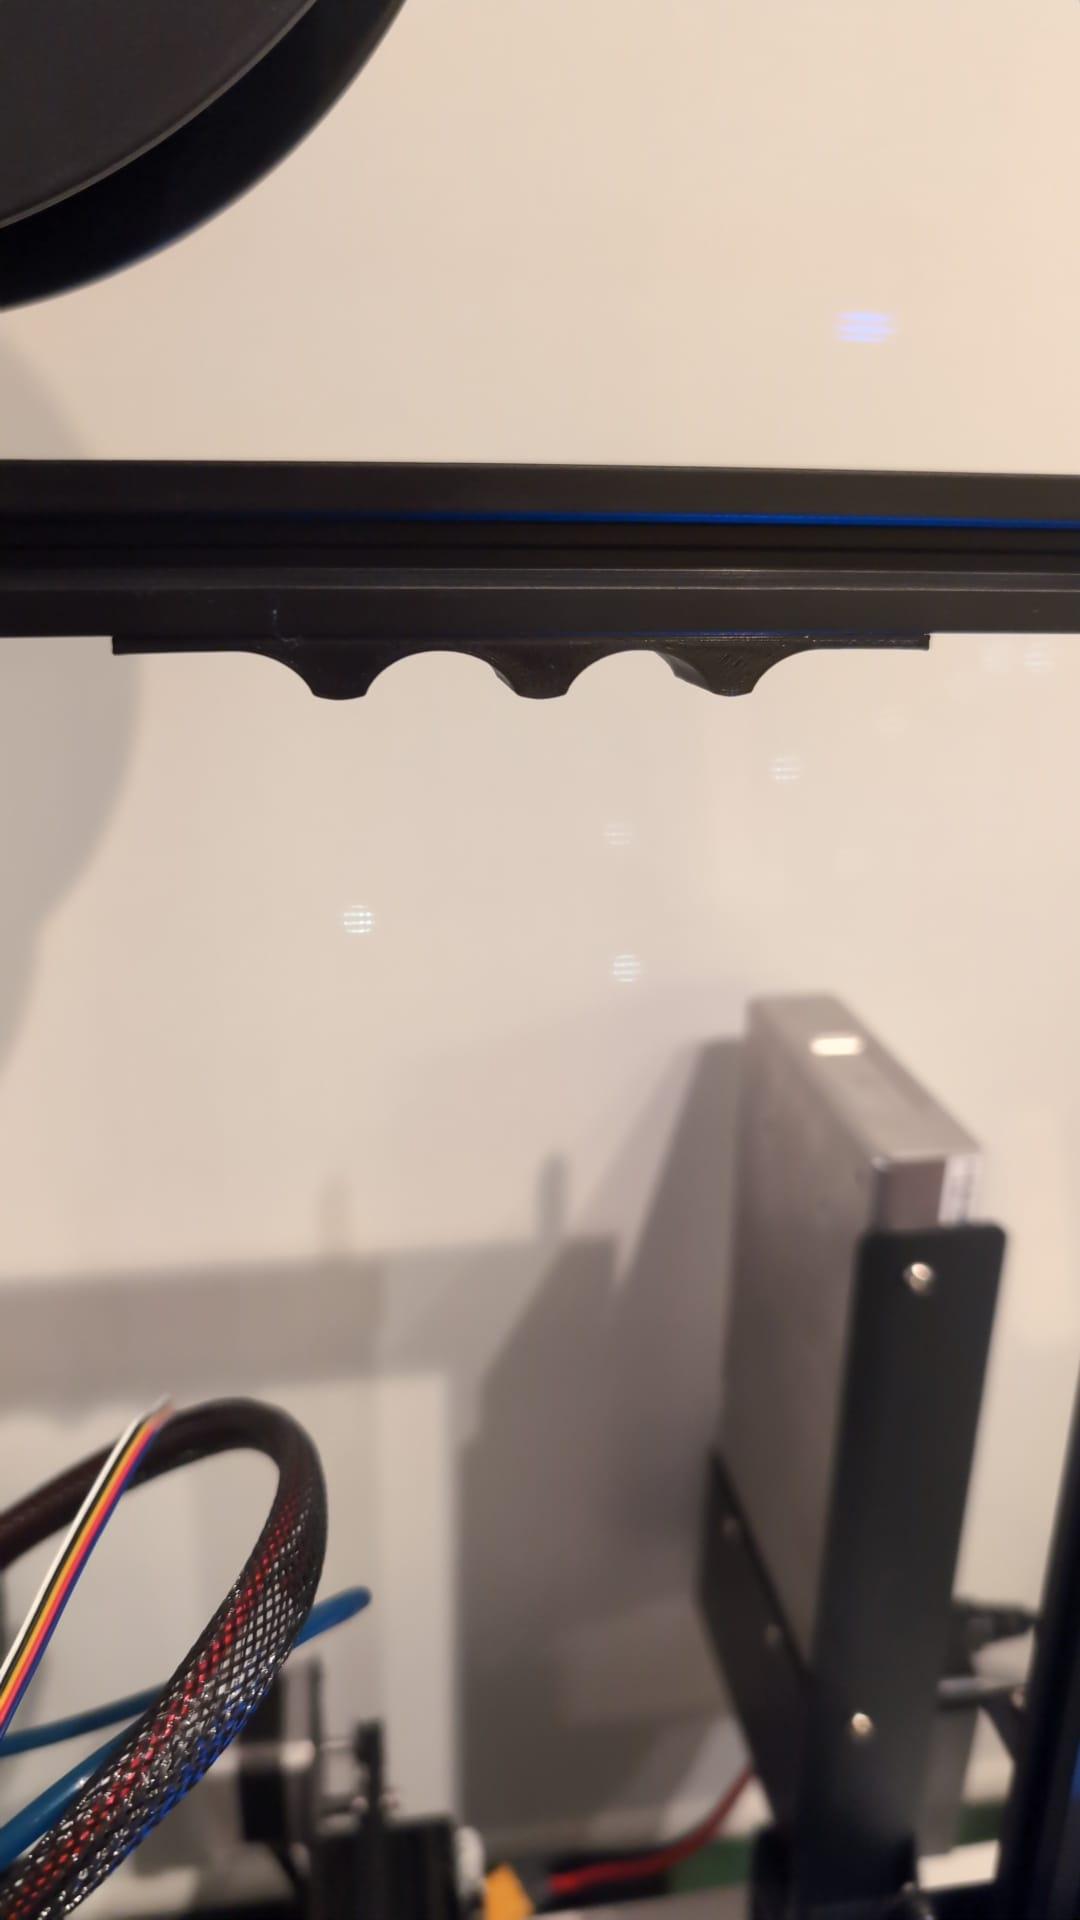 Minimalist V-Slot Handle - No tools, No parts - Ender 3, Pro, Cr-10, Anycubic, Anet, Geeetech, etc. 3d model